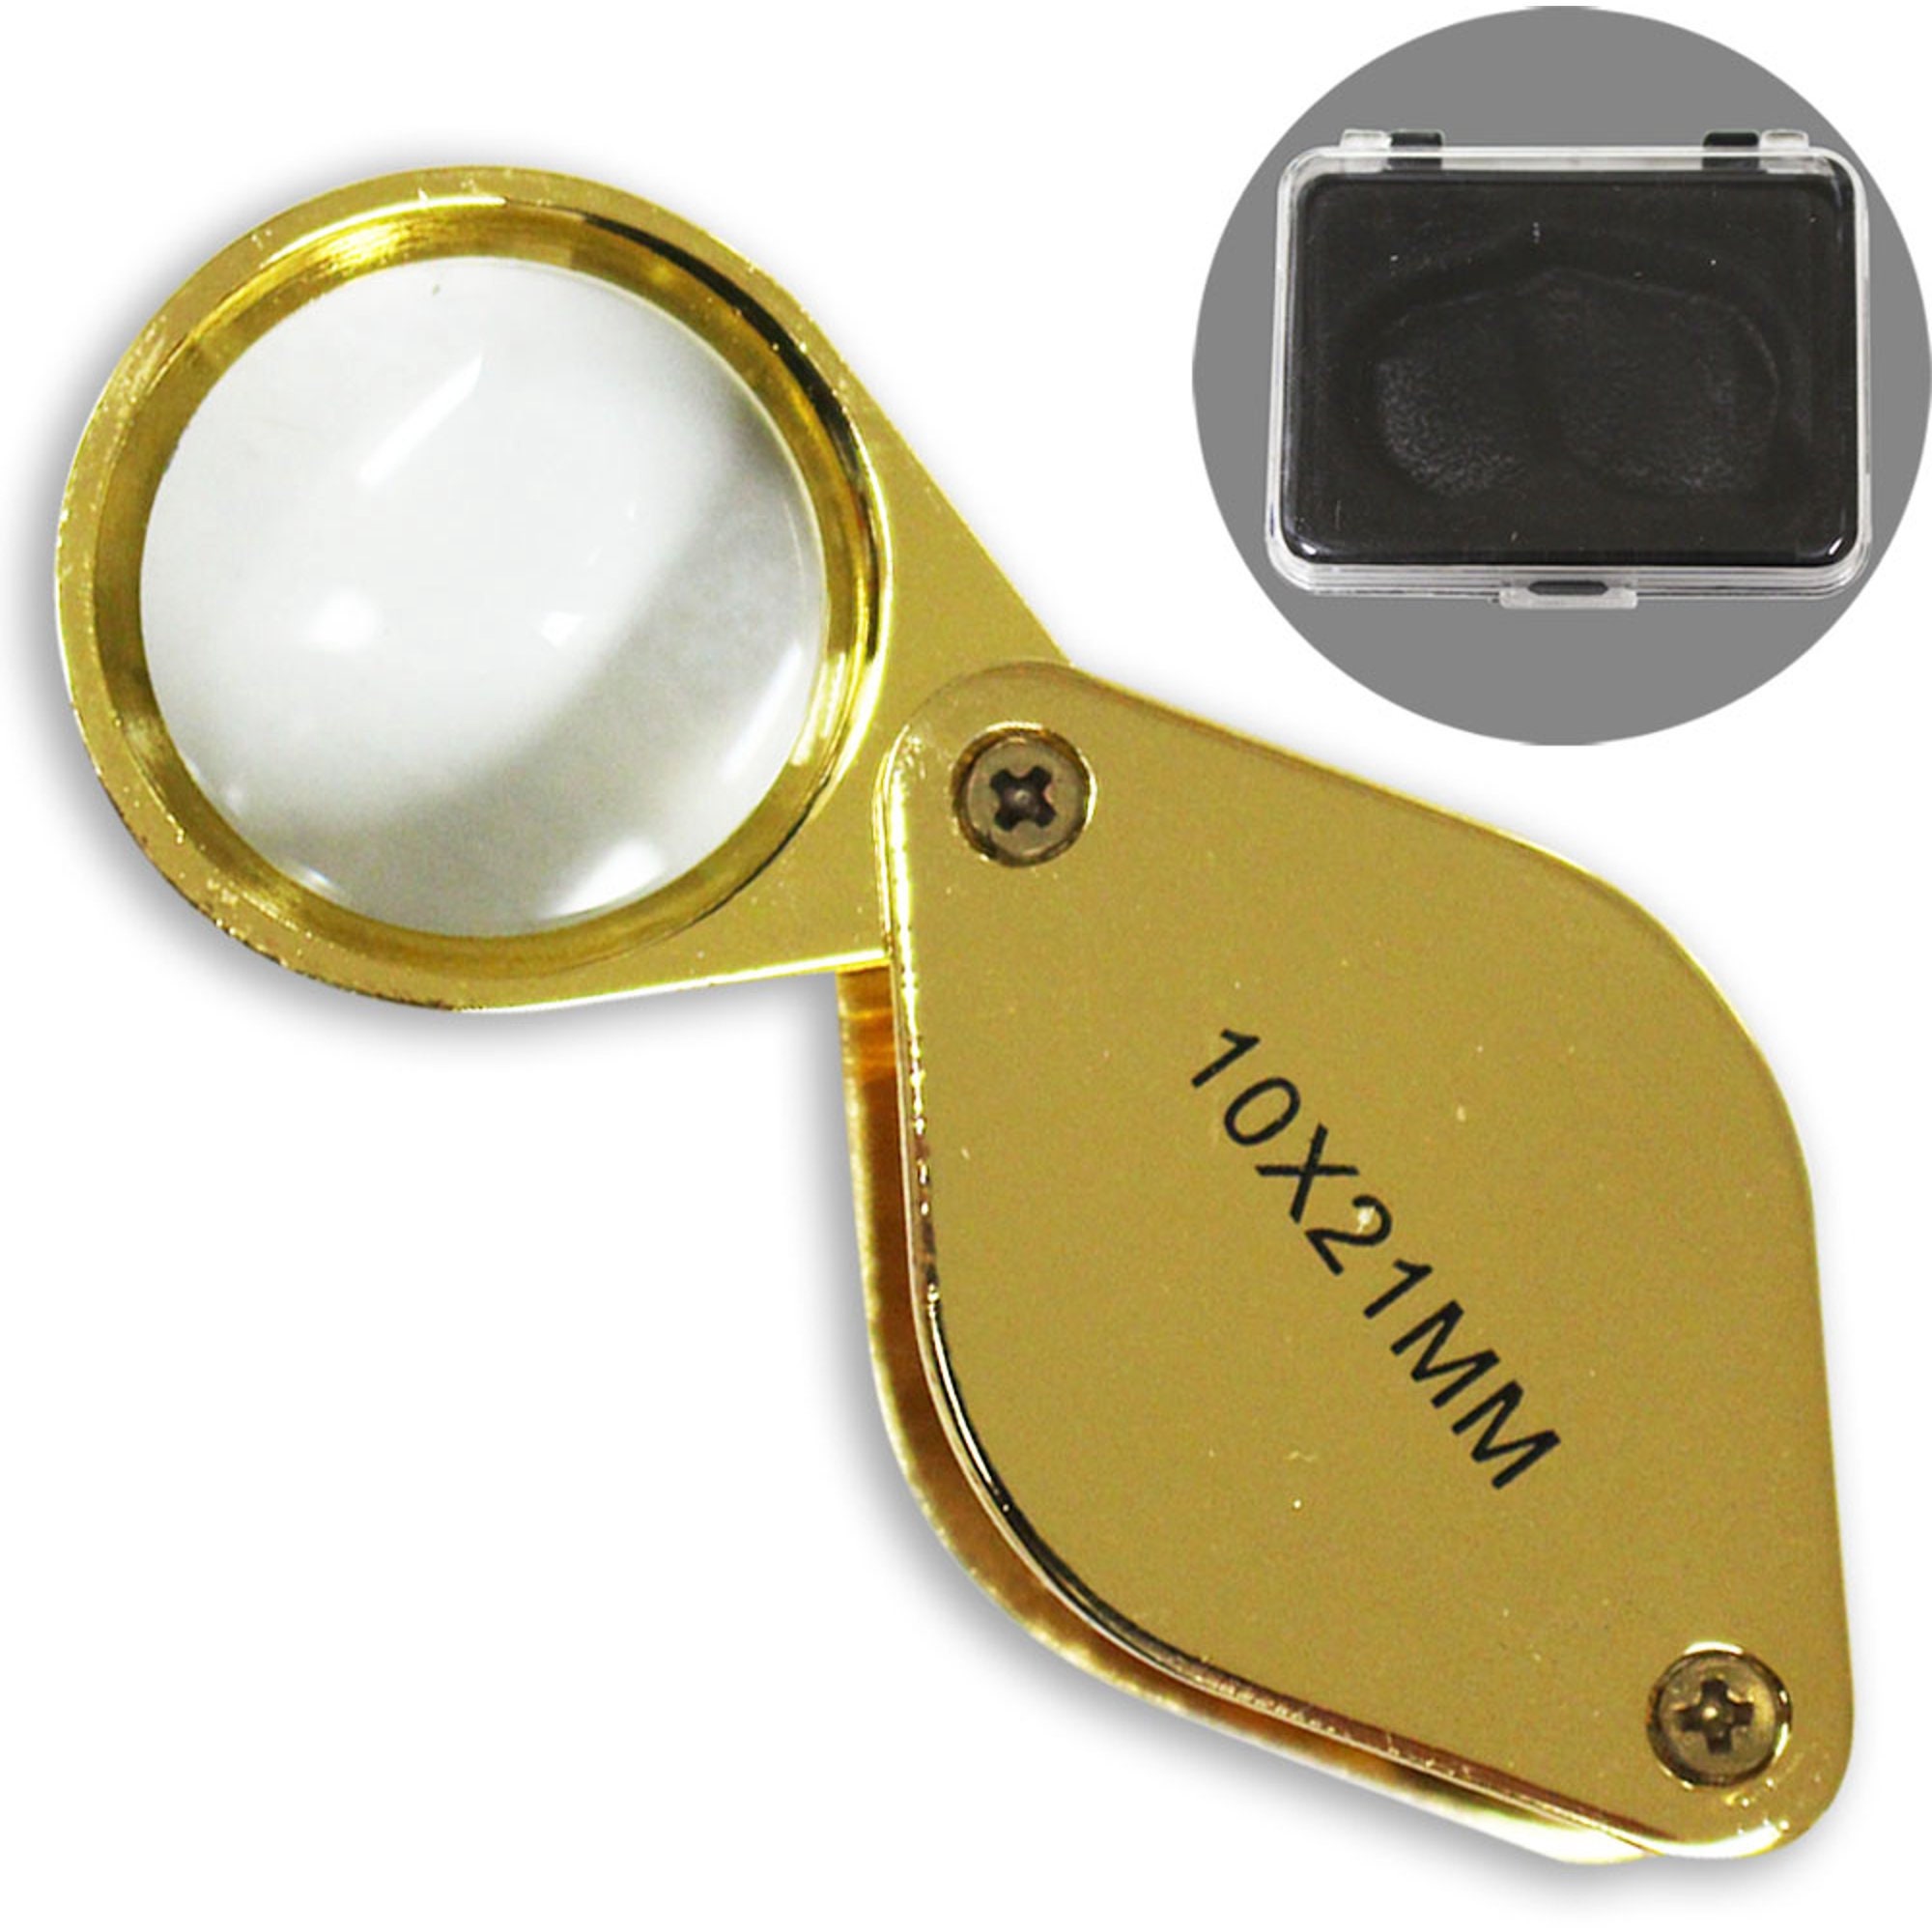 Jewelers LOUPE 20x 21mm Lens 20 Power MAGNIFYING for Jewelry Coins Stamps  Jeweler's Silver Finish Magnifier Eye Loop 20 X 20 Power Magnify 